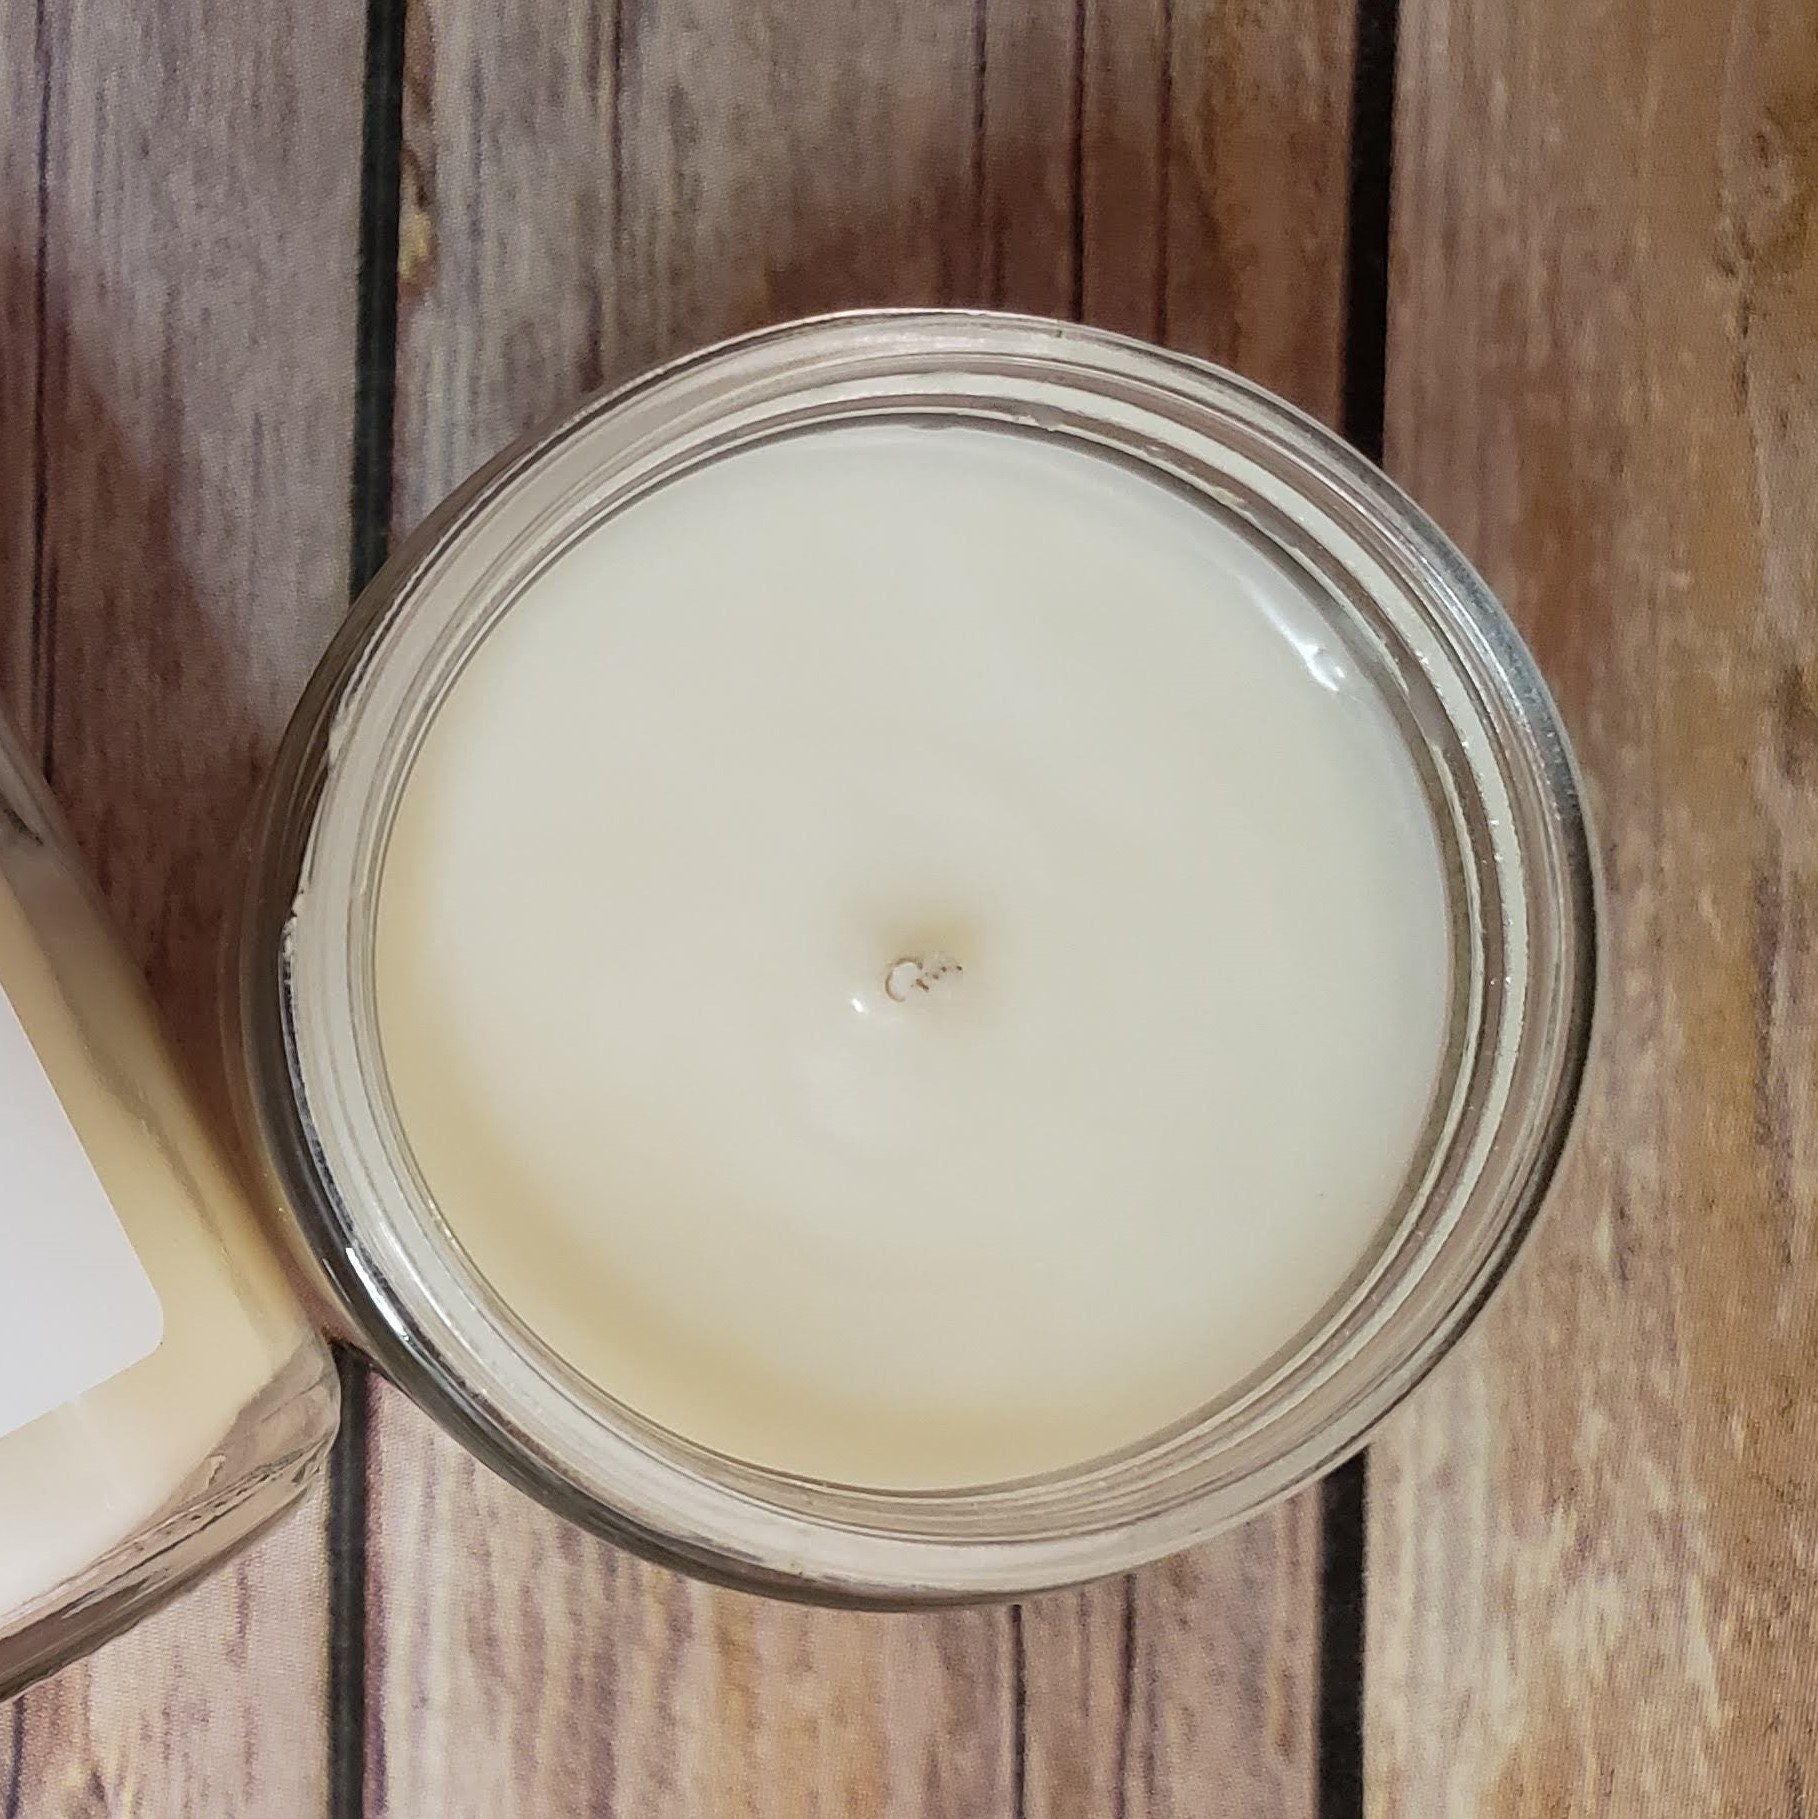 Ivy Creek No 31 | Mango & Coconut Milk Soy Blend Candle | Hand Poured | 7 oz | Cotton Wick | Small Batch | Clean Burning | Container Candle